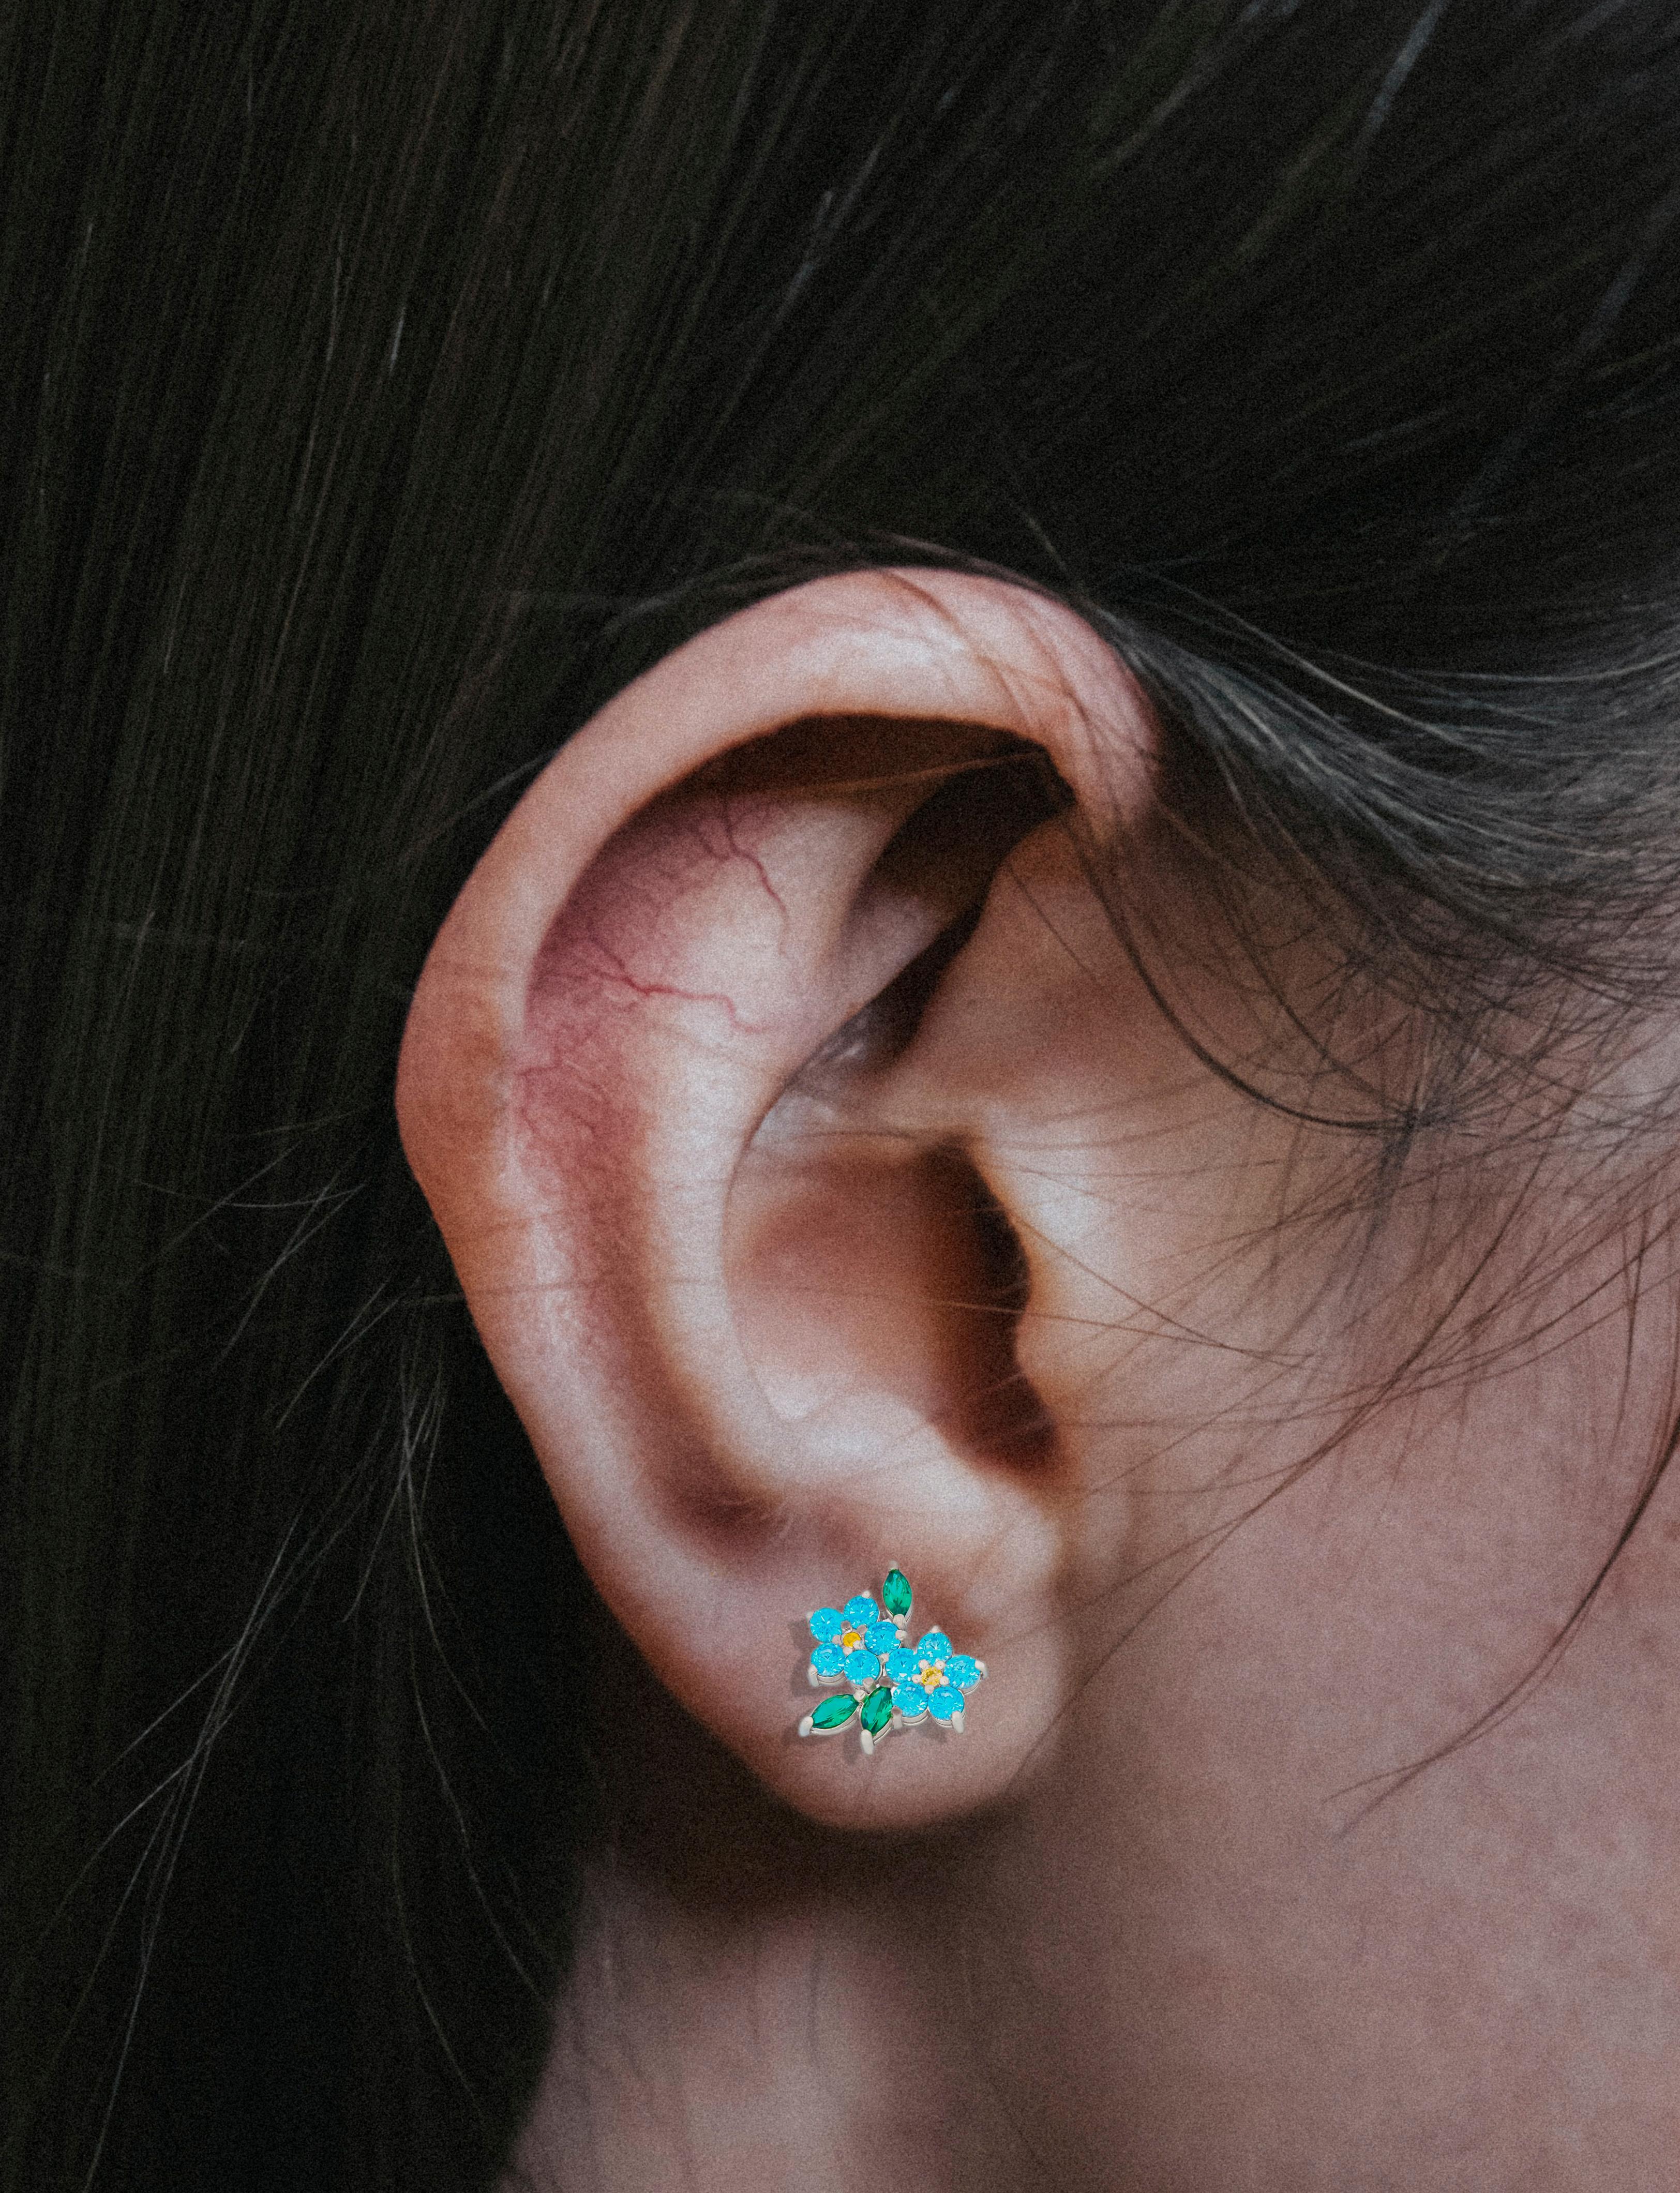 Forget me know flower earrings studs in 14k gold 4